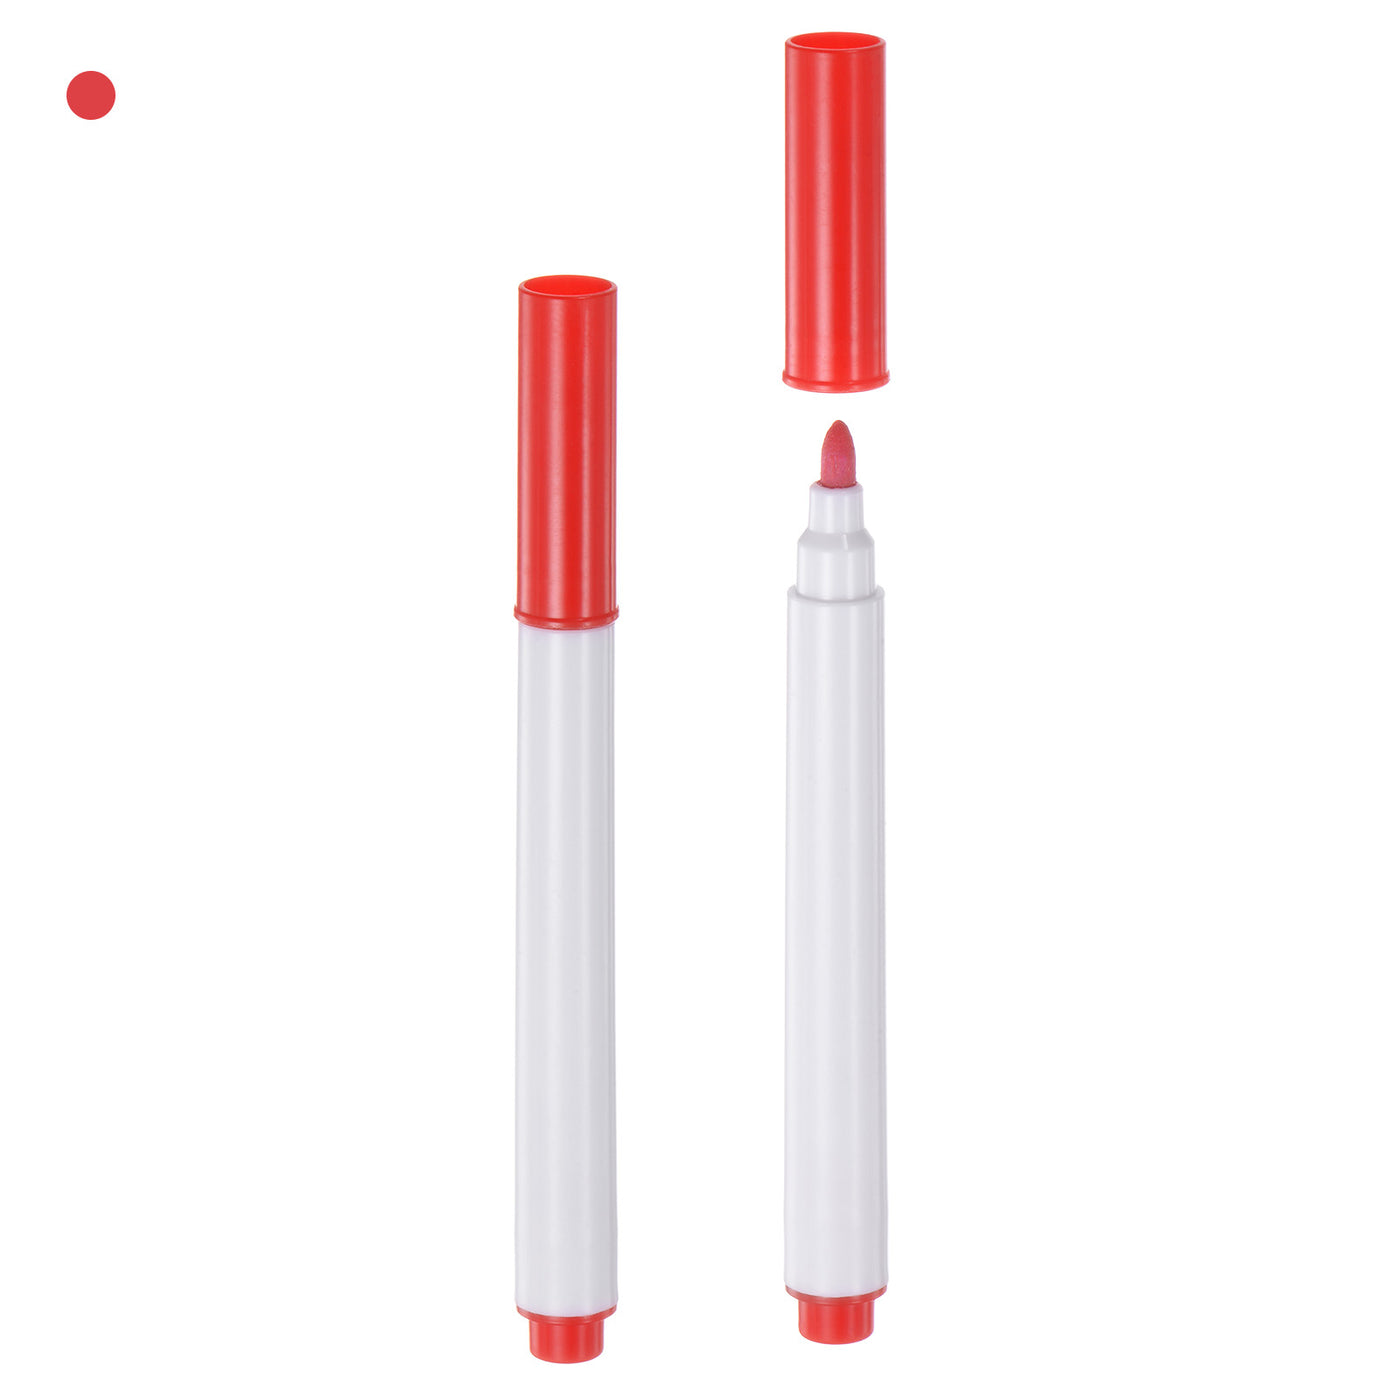 Harfington 12pcs Disappearing Ink Fabric Marker Pen Marking and Tracing Tools, Red